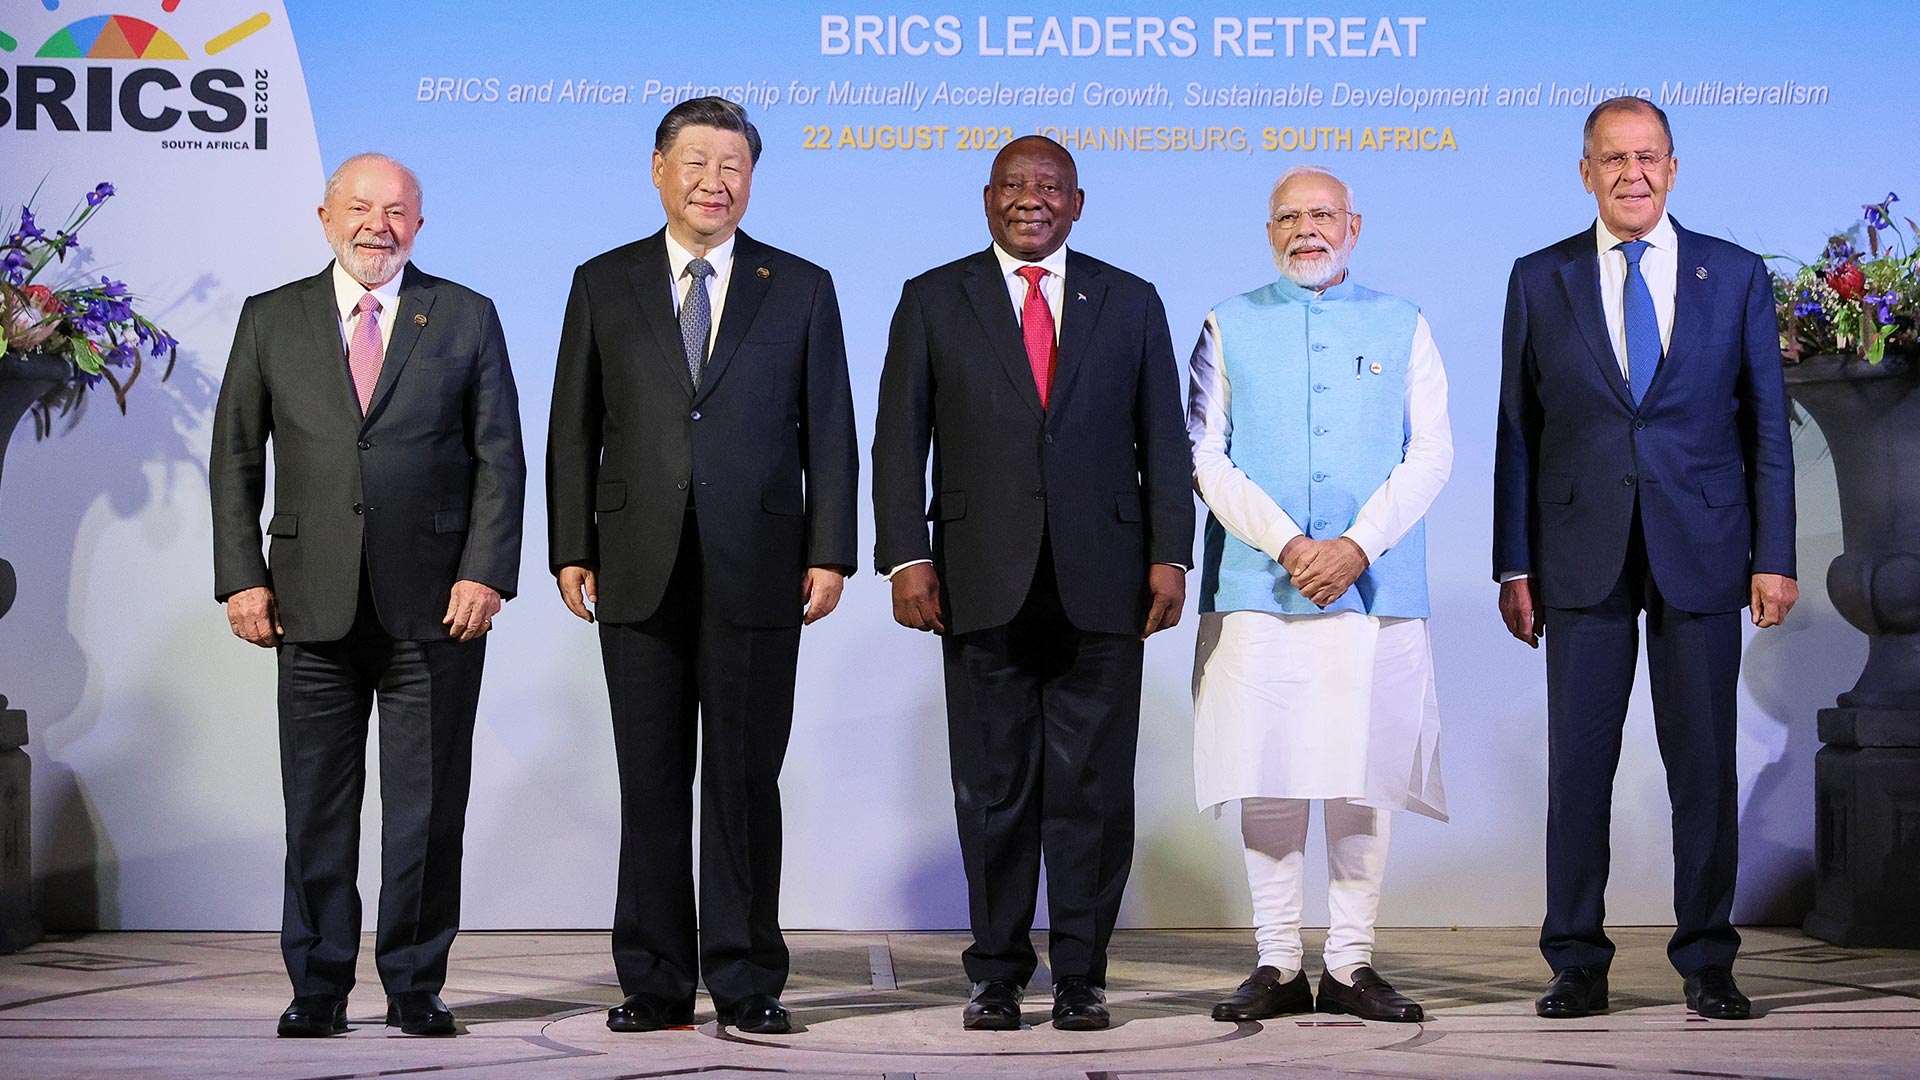 (From left) Brazilian President Lula da Silva, Chinese President Xi Jinping, South African President Cyril Ramaphosa, Indian Prime Minister Narendra Modi, and Russian Foreign Affairs Minister Sergey Lavrov at the 15th BRICS Summit in Johannesburg, South Africa. Photo: AFP.